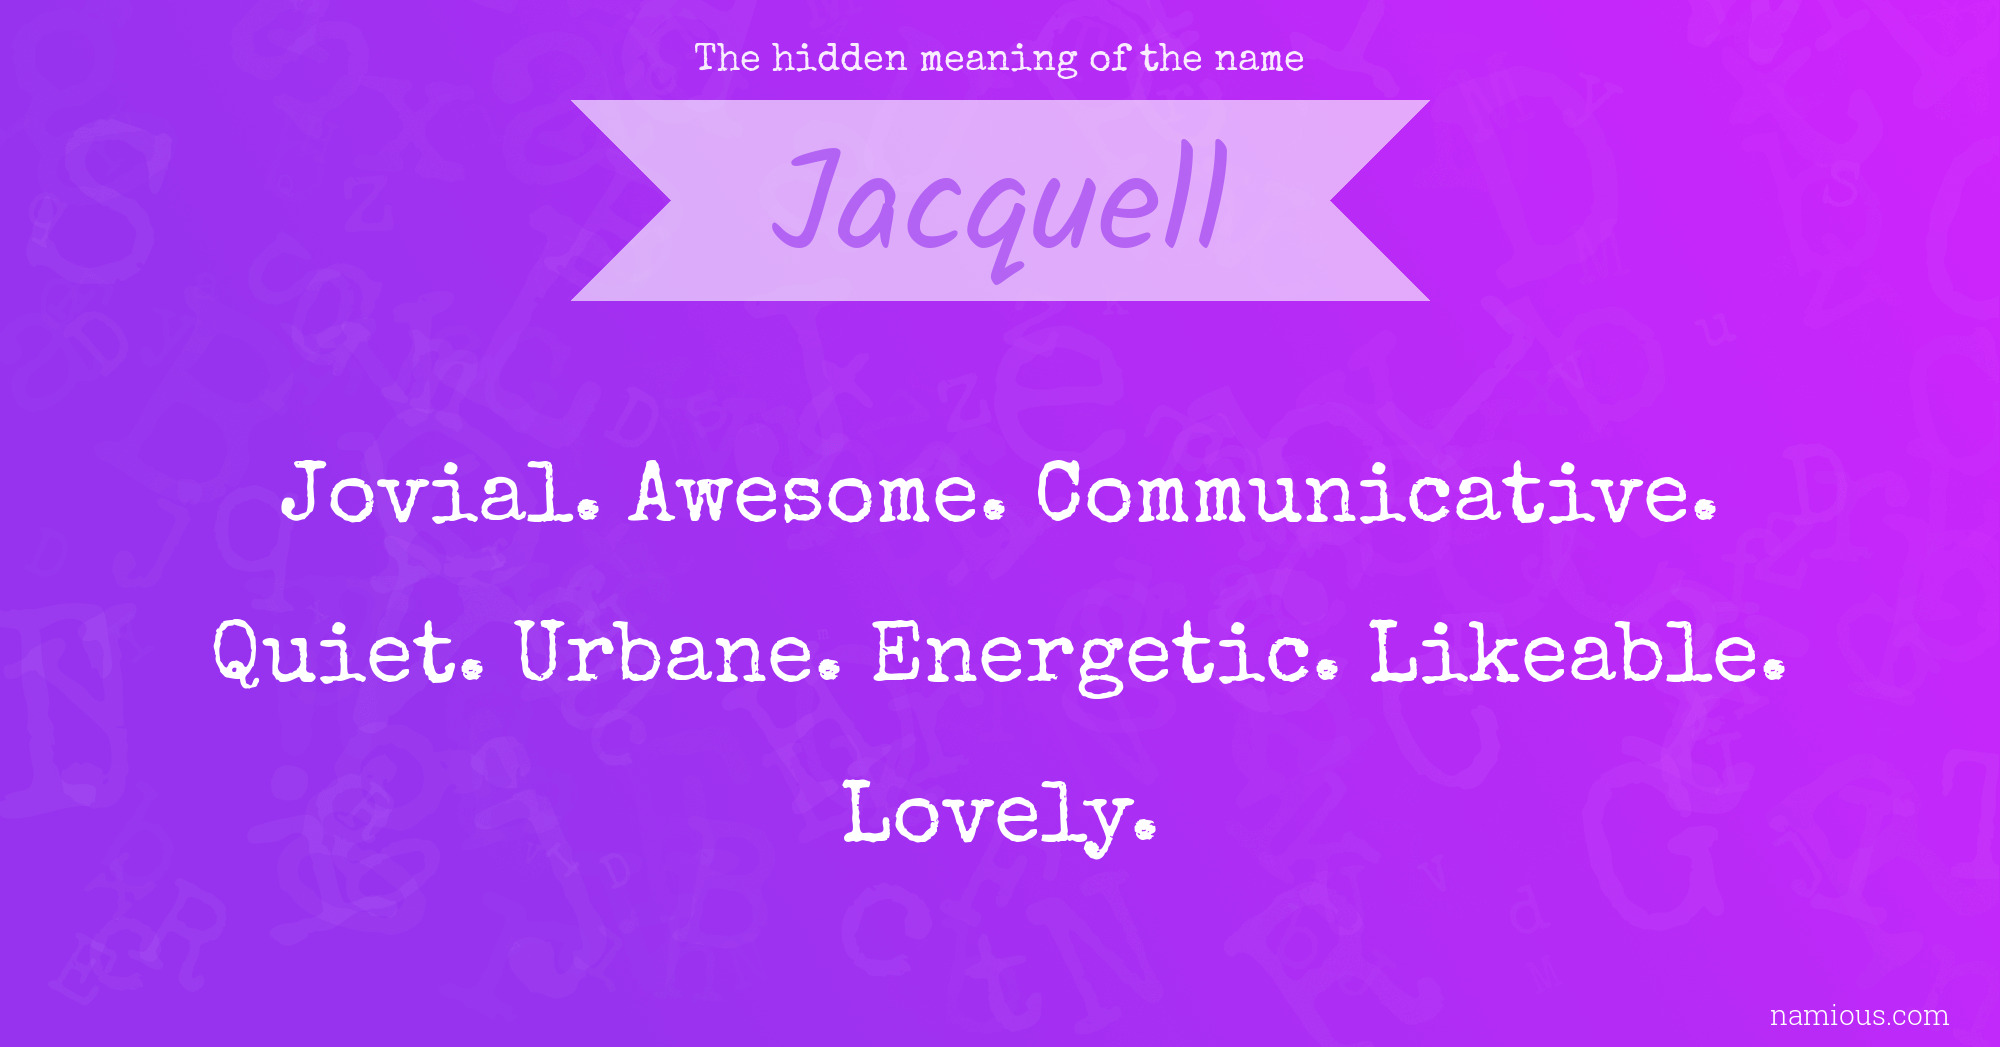 The hidden meaning of the name Jacquell